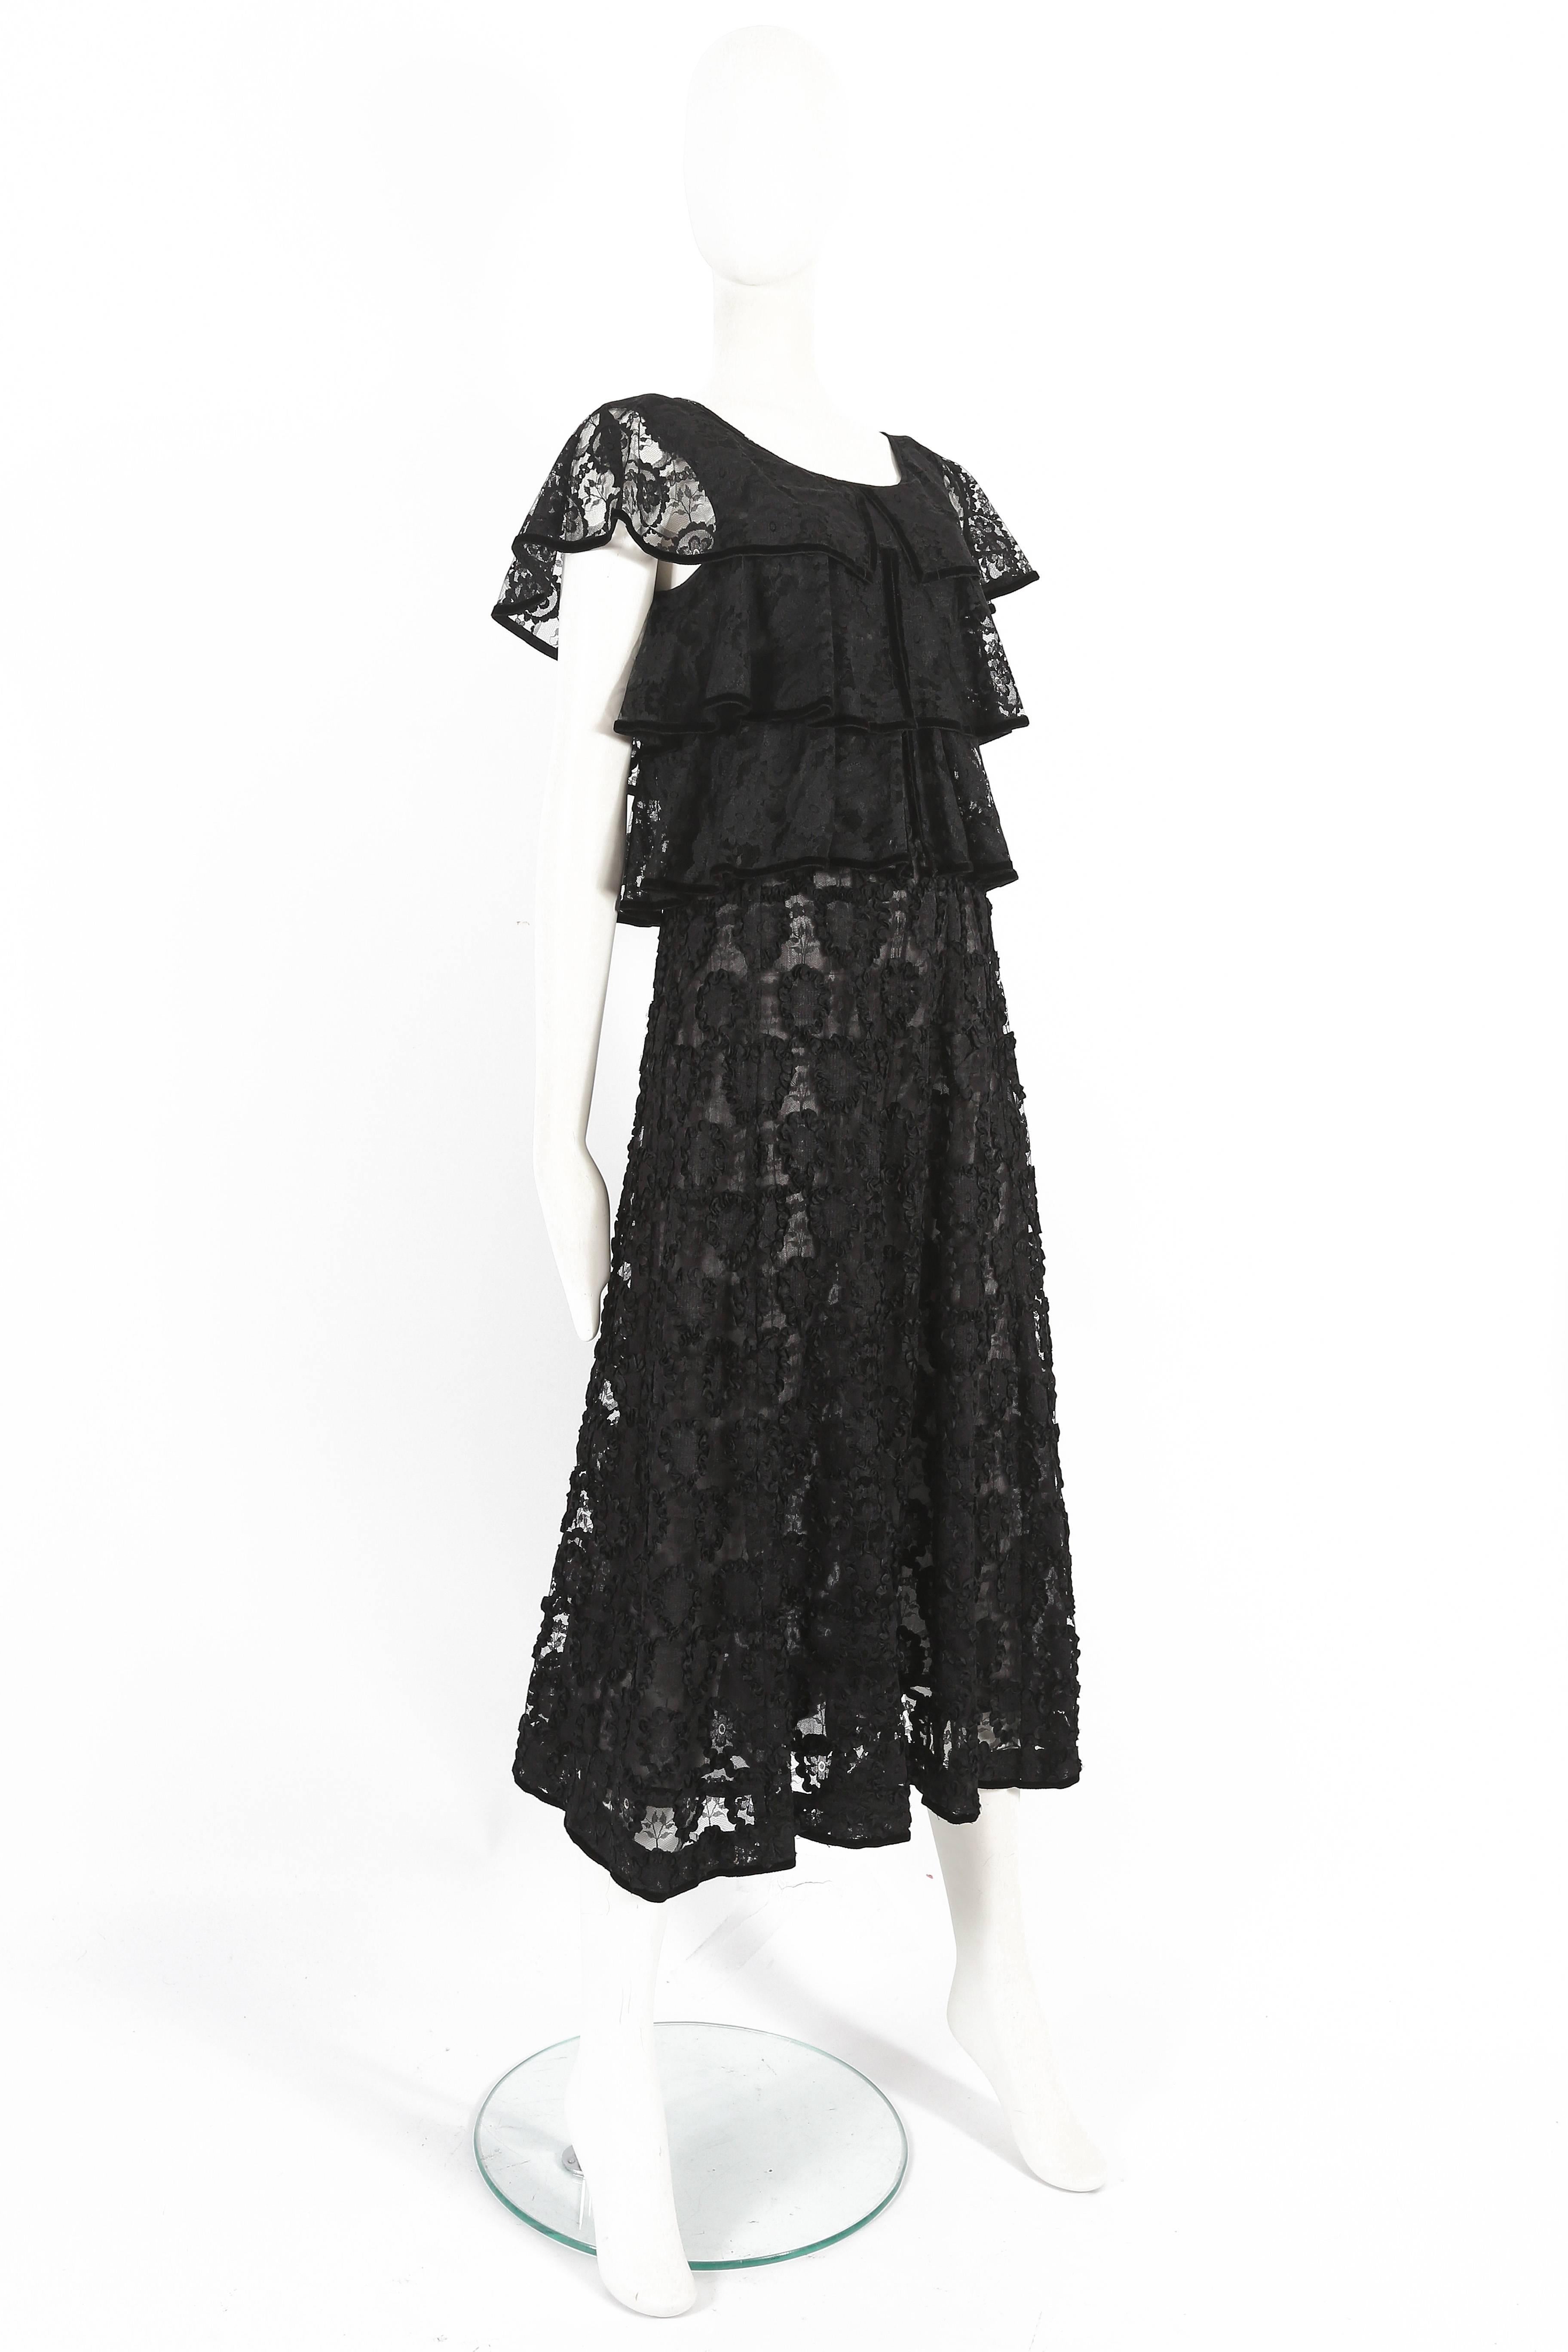 Thea Porter velvet trimmed lace evening dress, circa late 1960s at ...